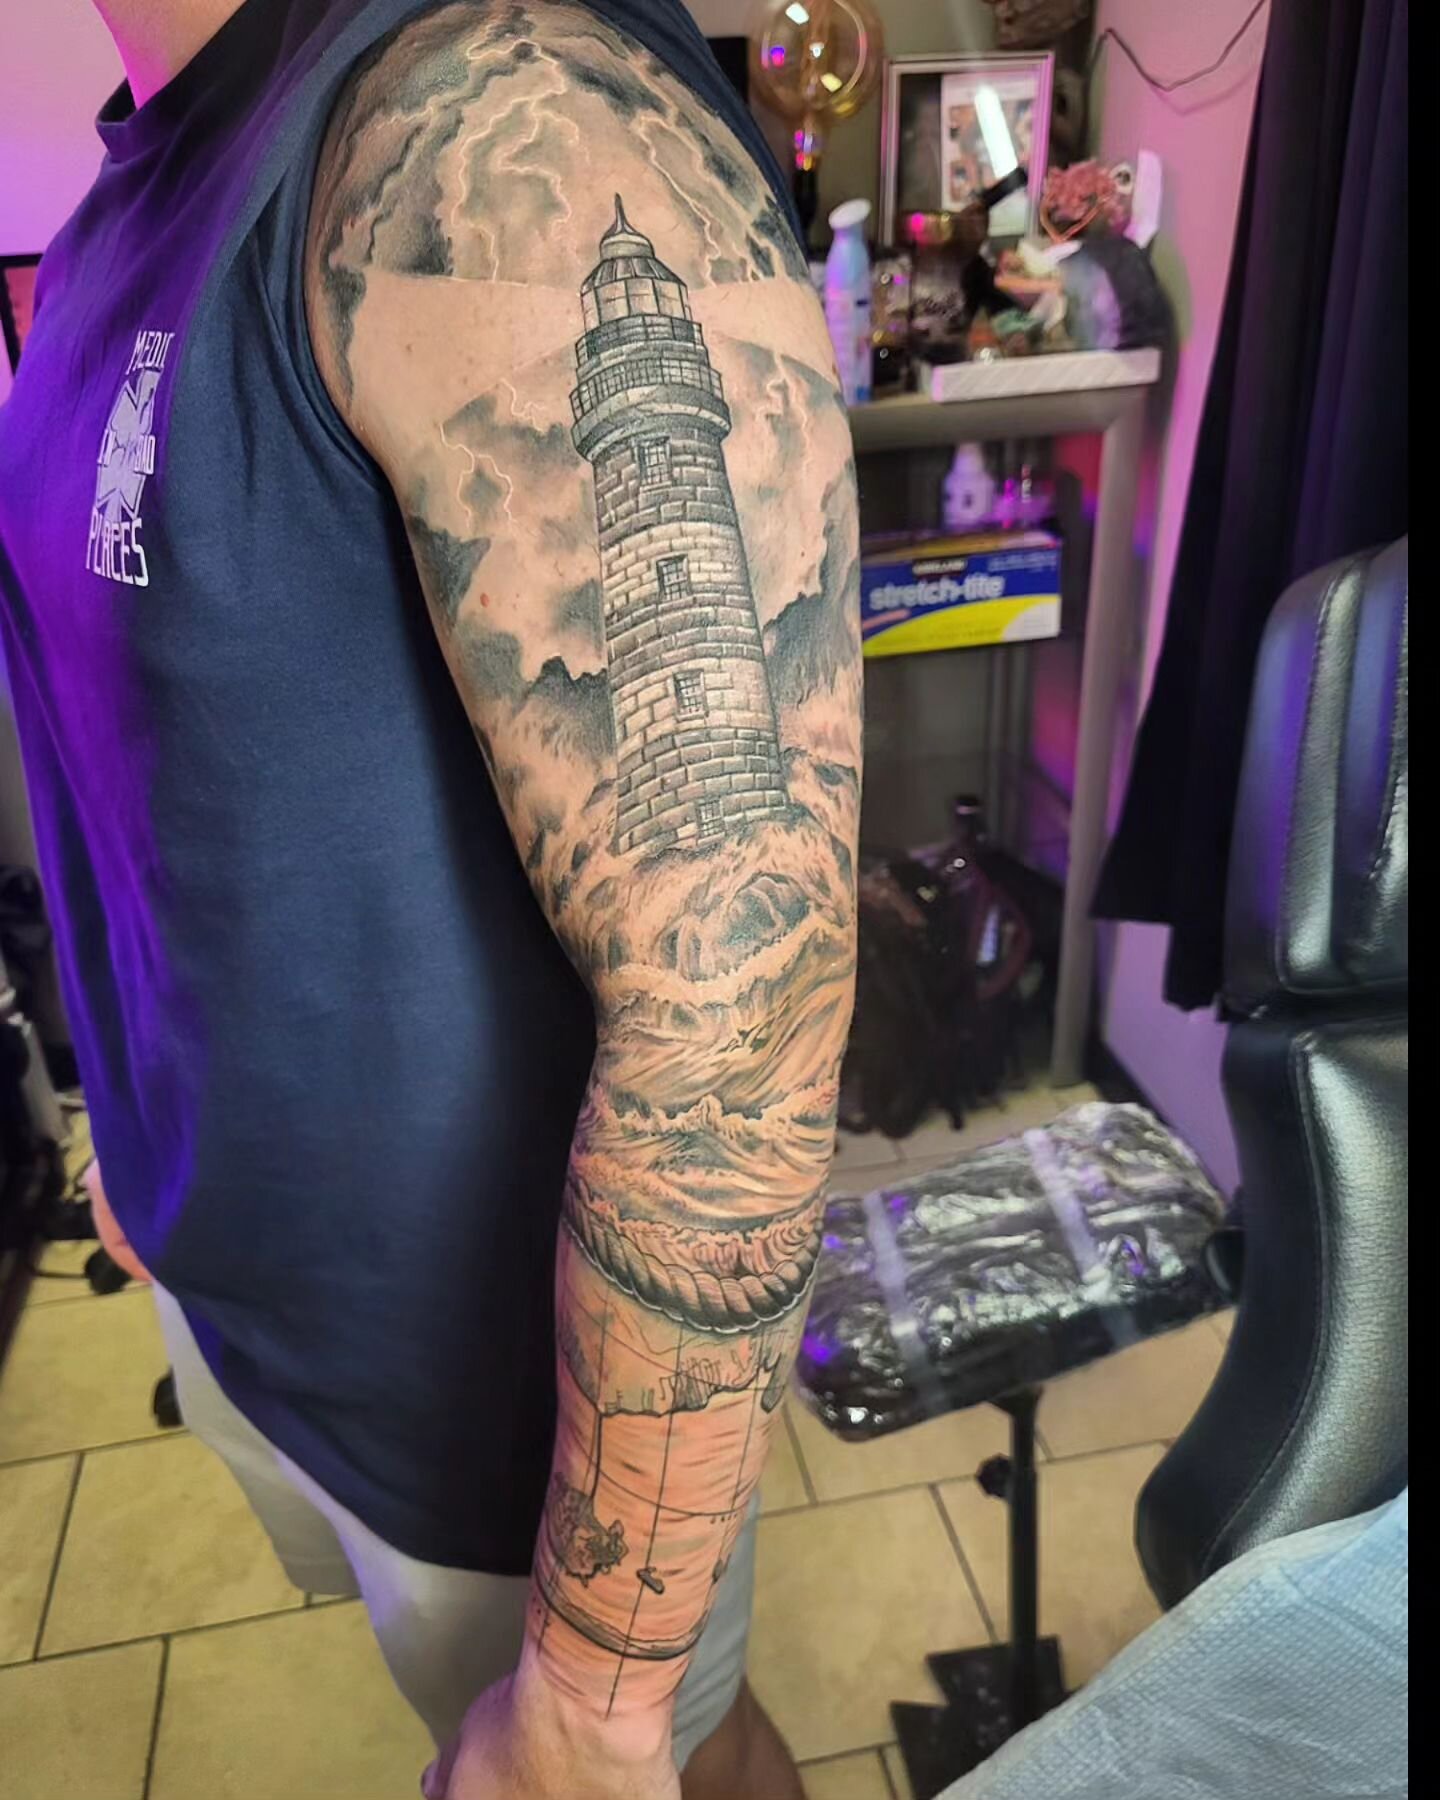 Lighthouse sleeve finished up most of it still have a few details and the inner bicep. #lighthousetattoo #lighthousesleeve #greatsouthbaymap #southshore #allenjenkinstattoo #houseofcolourtattoo